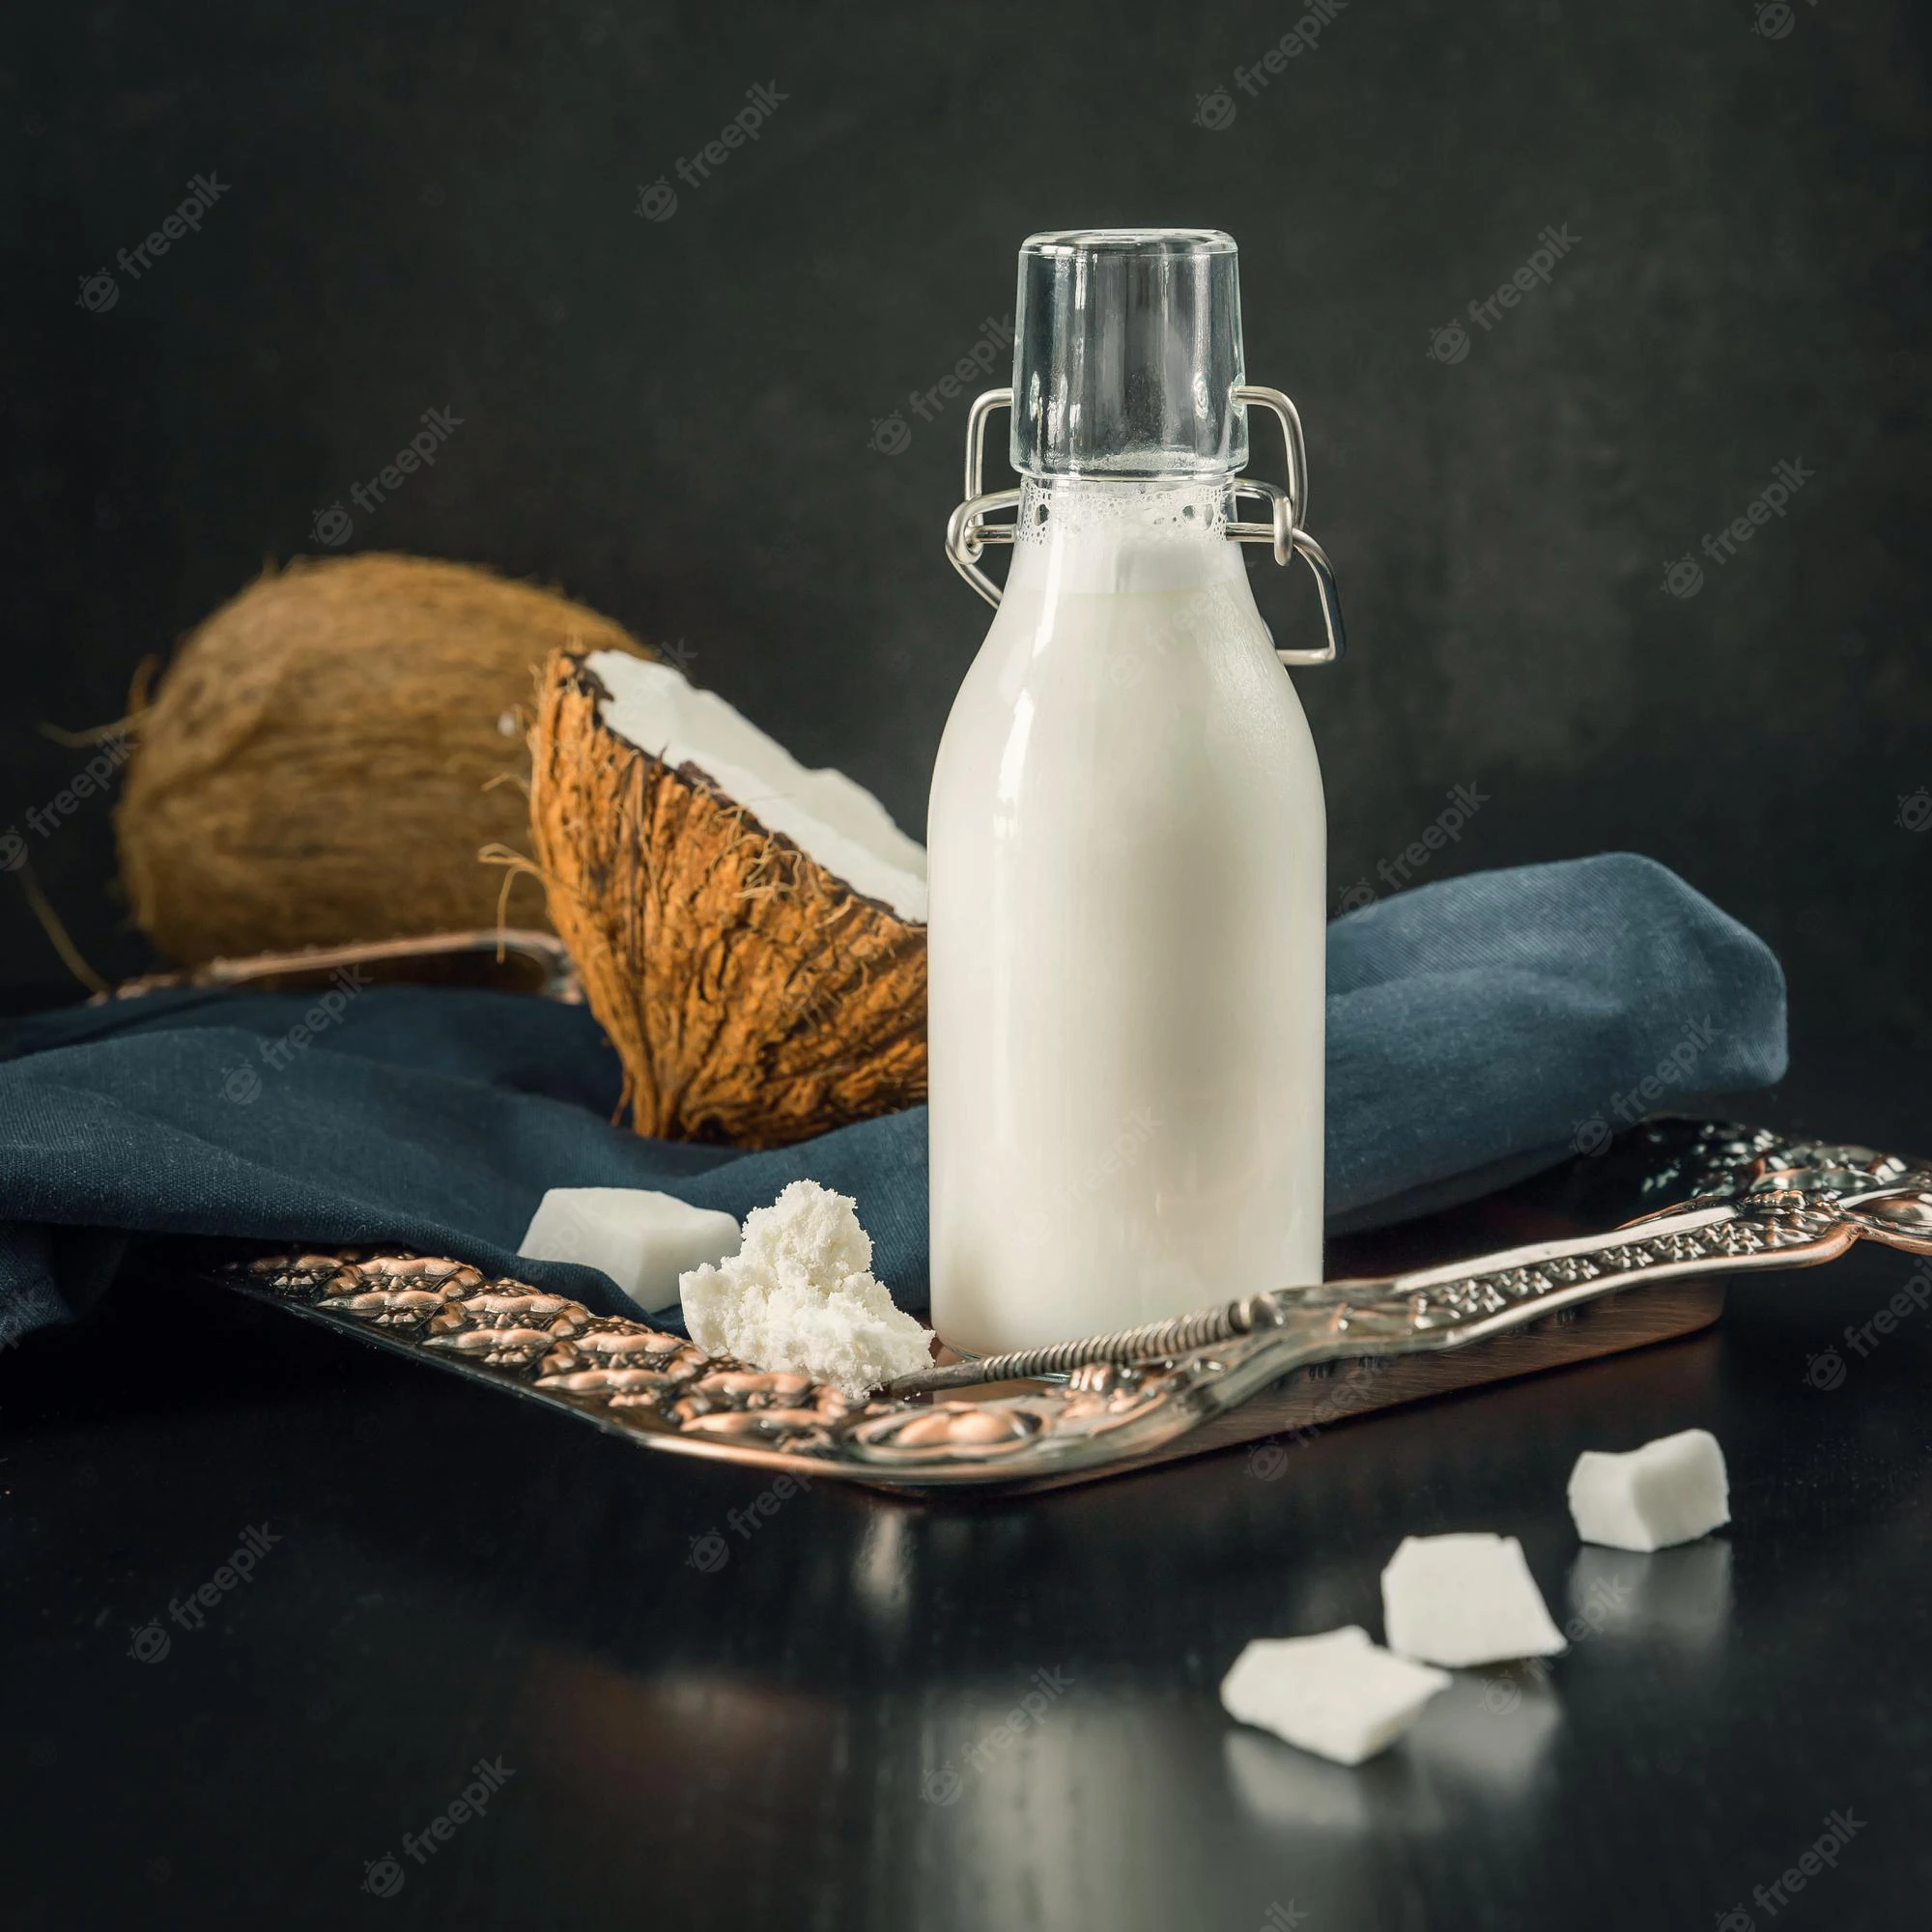 Coconut Milk vs. Dairy Milk: Which is the Healthier Choice for Your Diet?